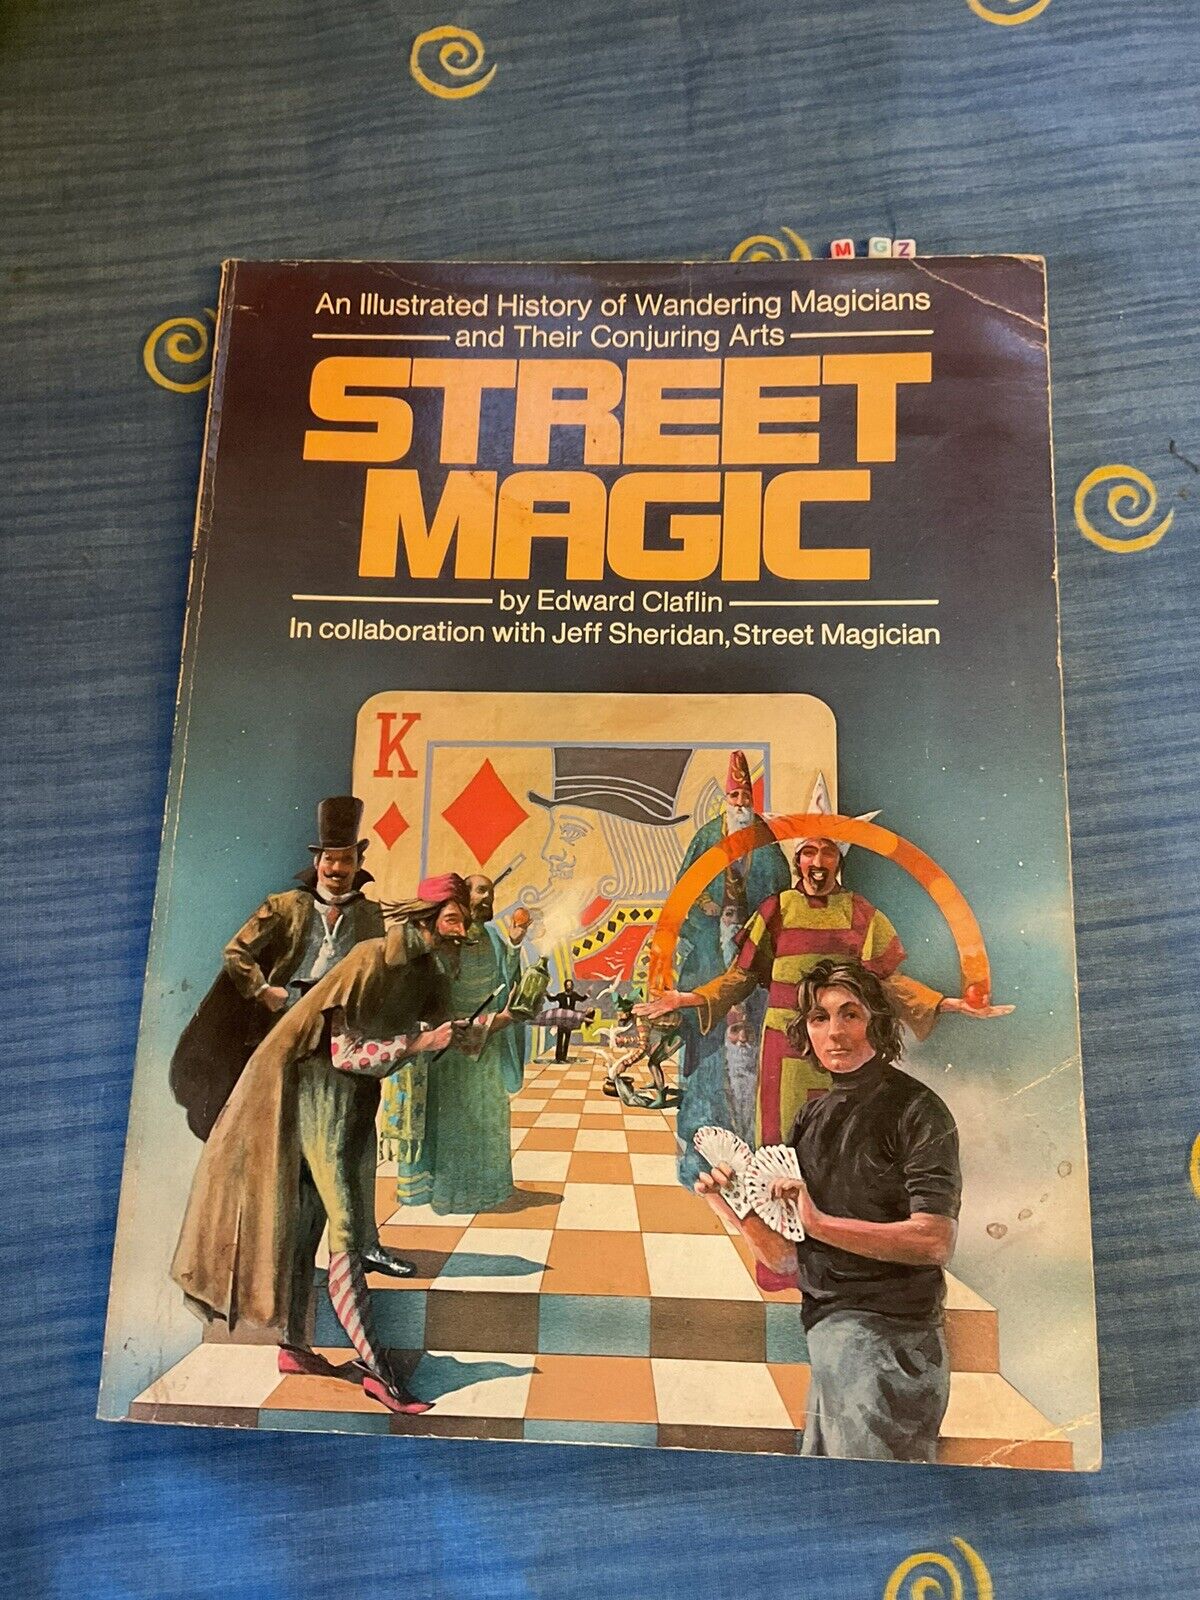 RARE street Magic , Through The Ages , Chaflin, First Edition , 1977 Conjuring